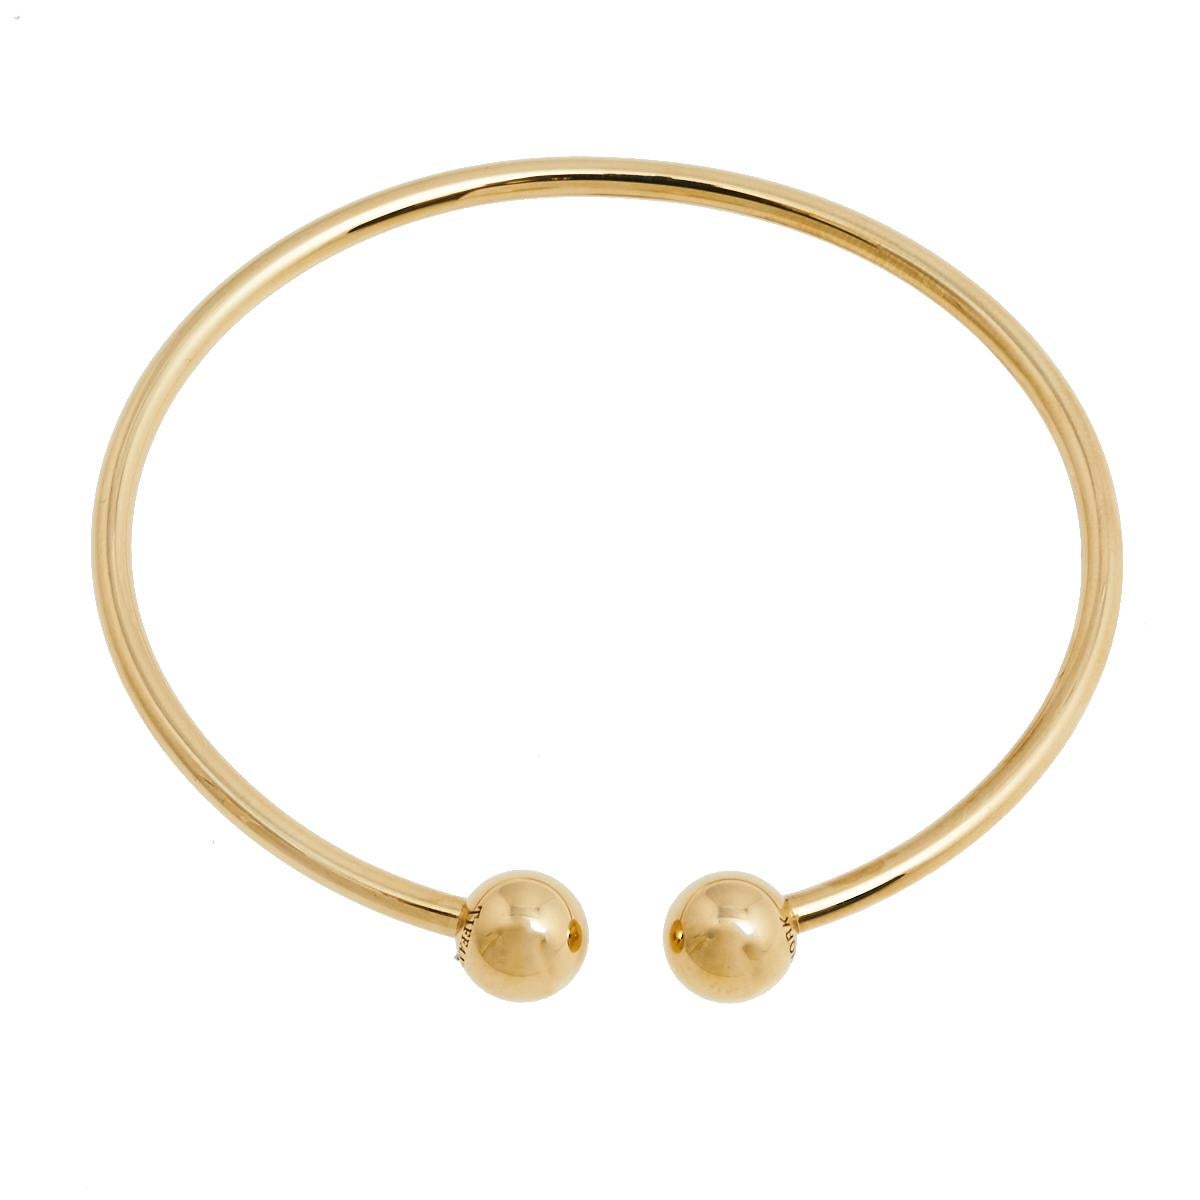 Tiffany & Co.'s spirit of innovation is well reflected in all its flawless designs. Crafted in 18K yellow gold, the bracelet comes sculpted in a wire-like band punctuated with two circular motifs on its ends. It can be worn with casual or formal